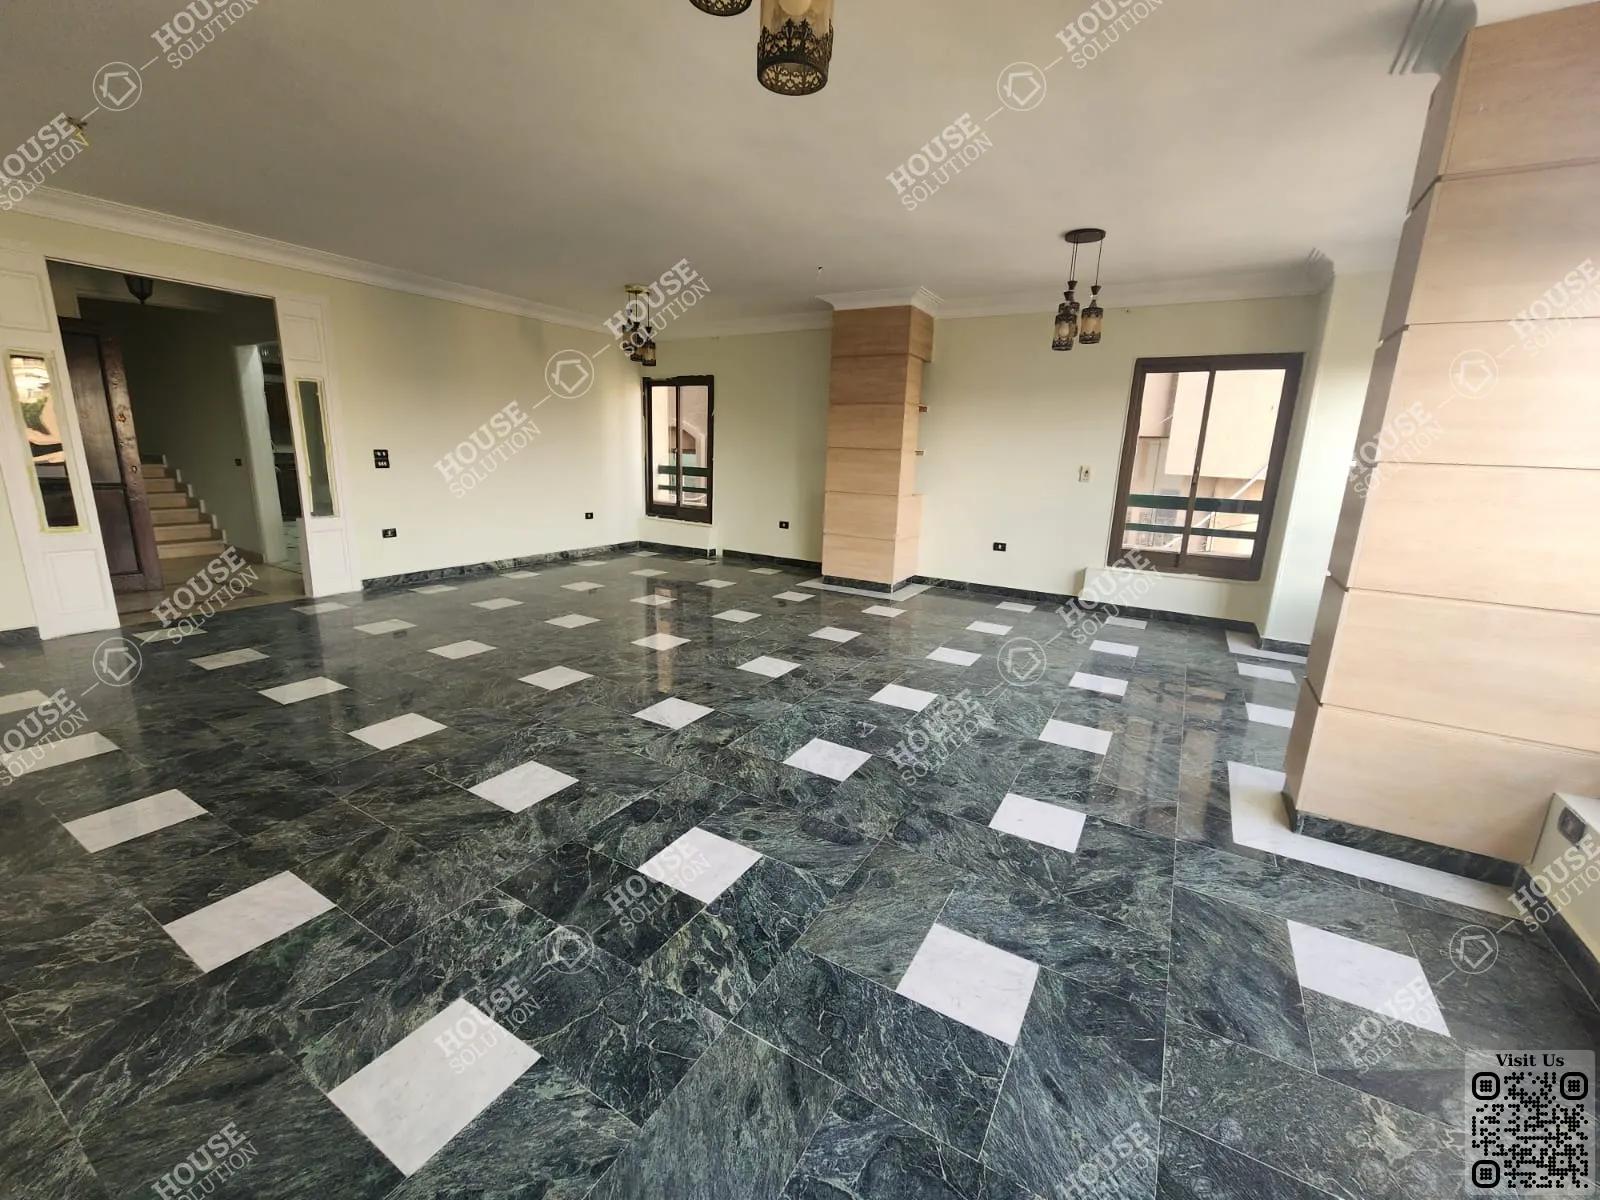 RECEPTION  @ Apartments For Rent In Maadi New Maadi Area: 175 m² consists of 3 Bedrooms 2 Bathrooms Semi furnished 5 stars #5776-0